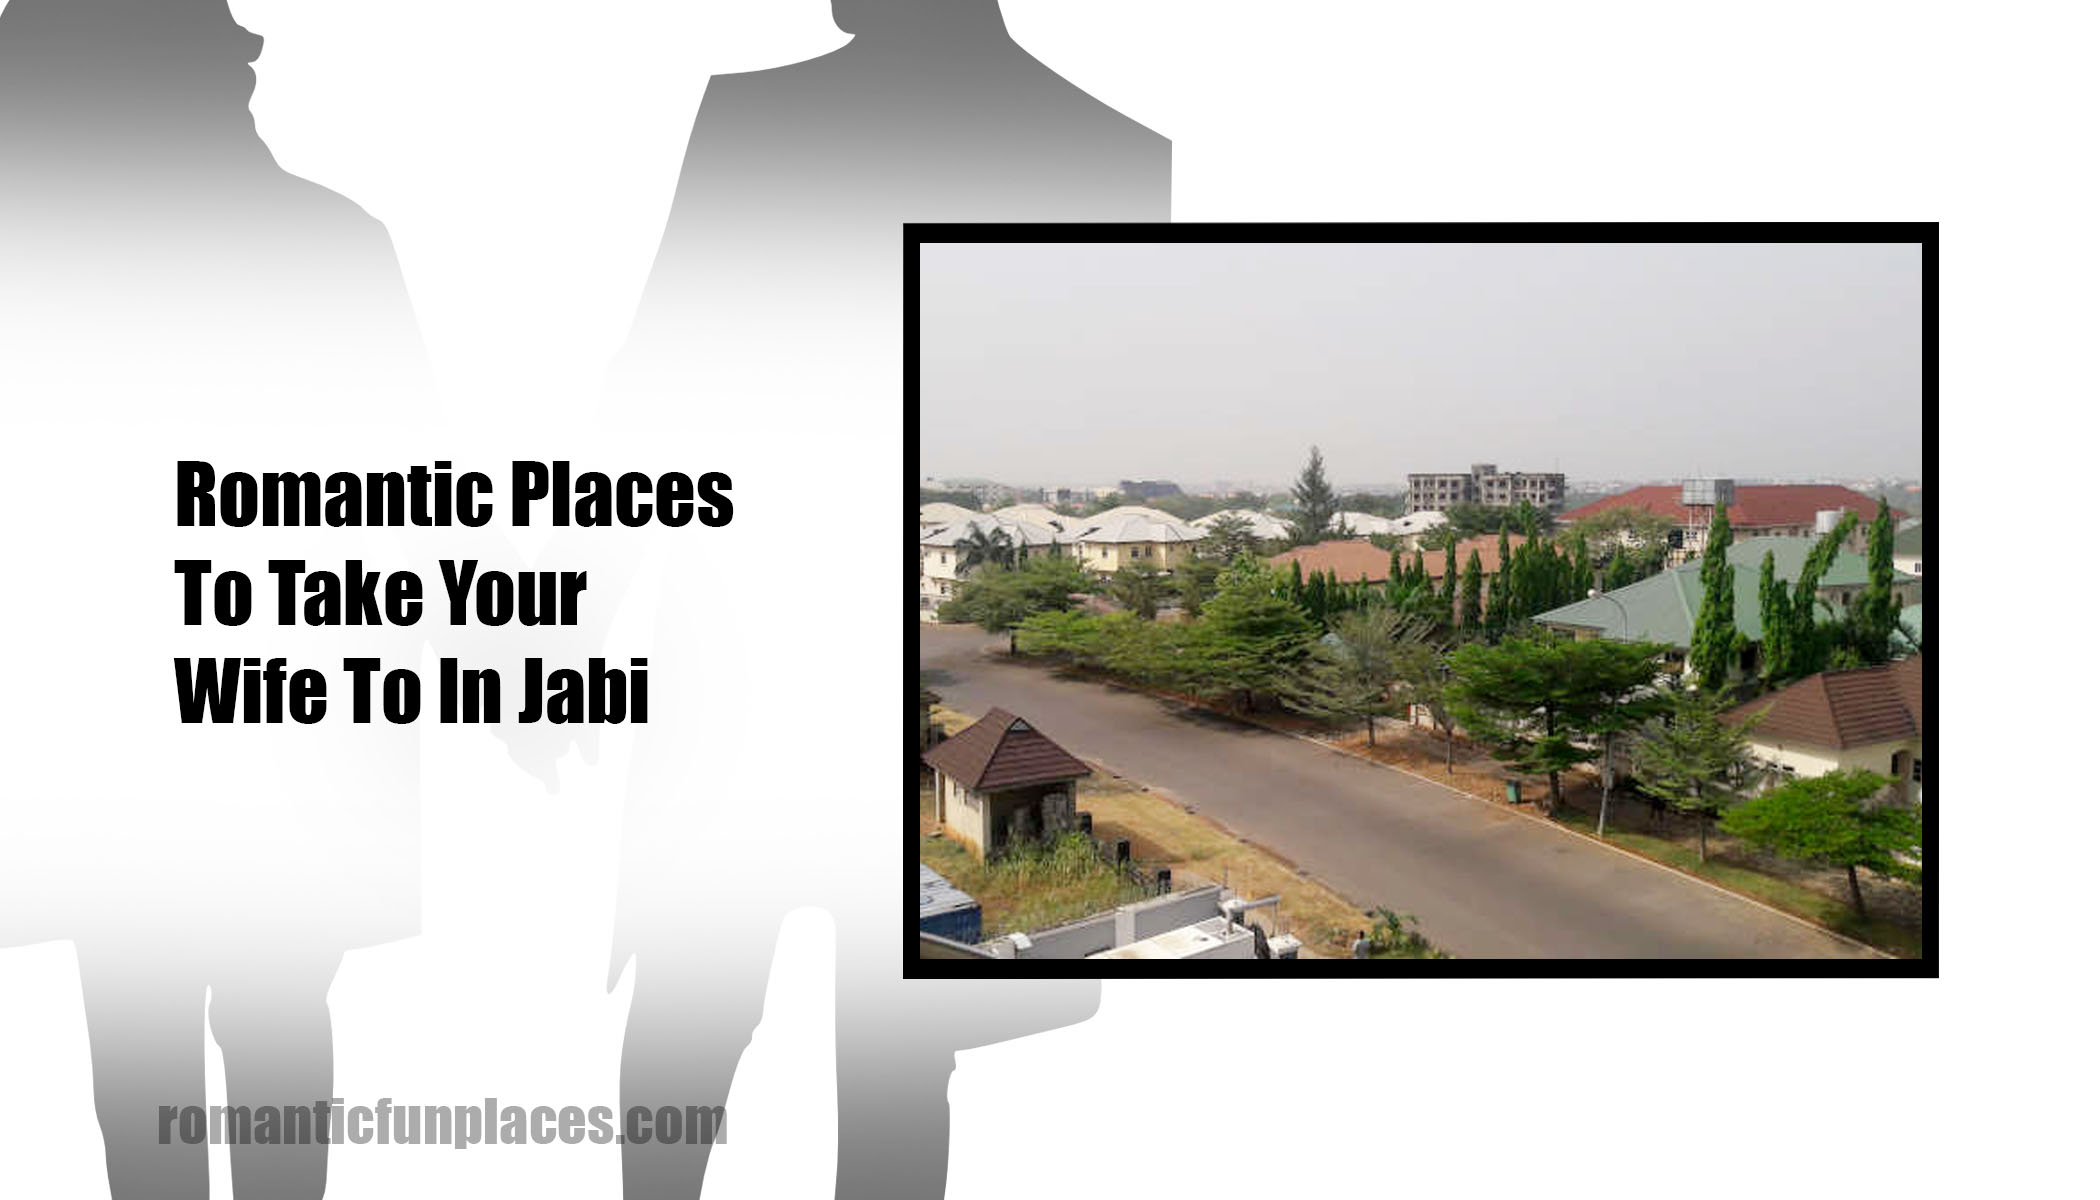 Romantic Places To Take Your Wife To In Jabi